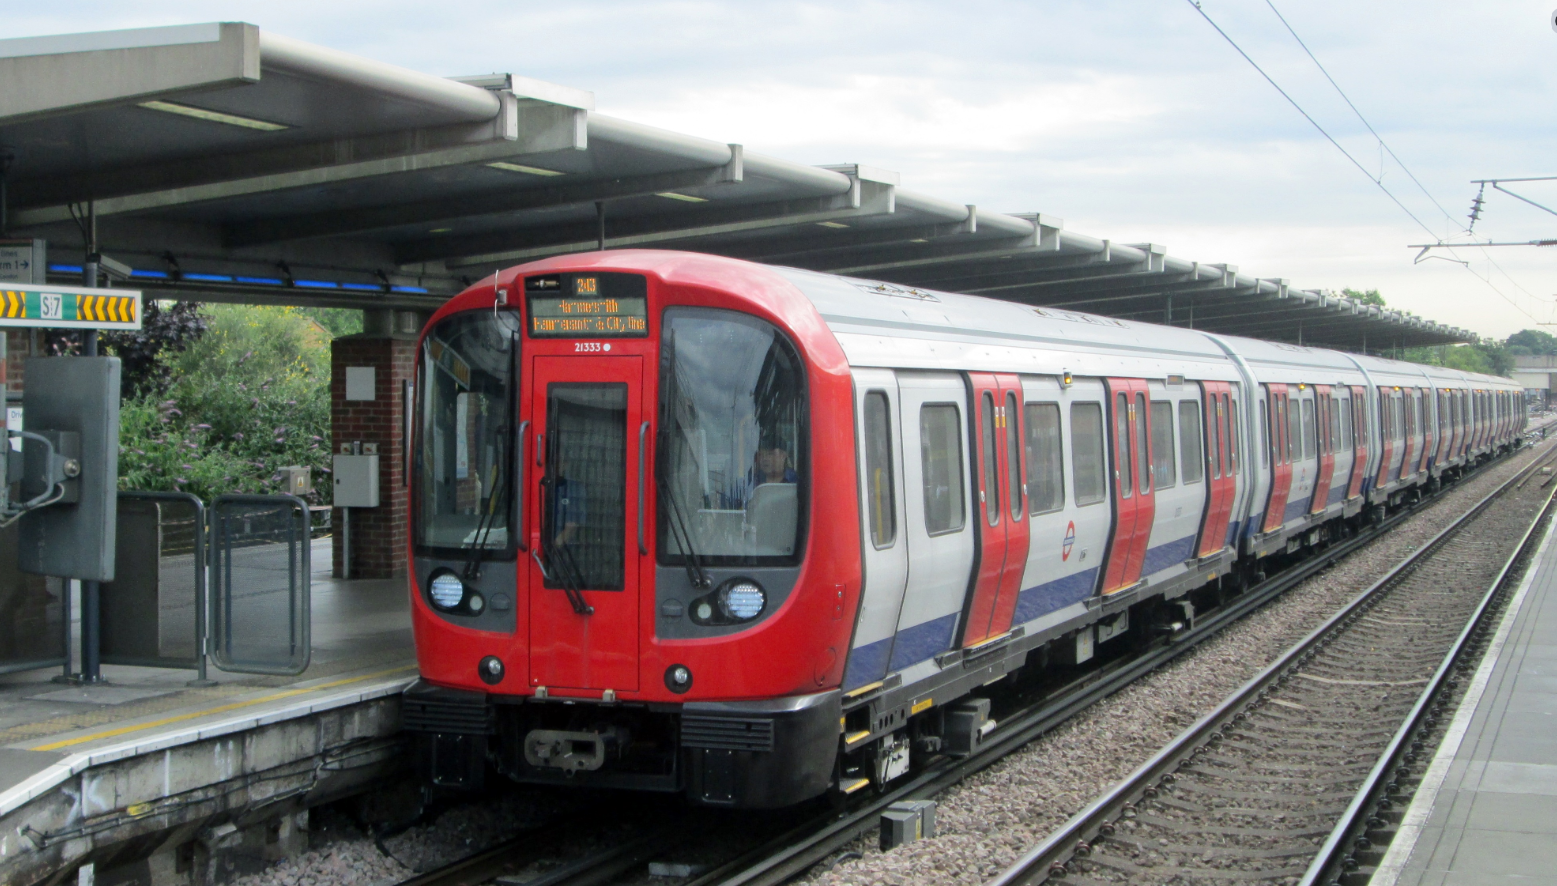 hammersmith and city line